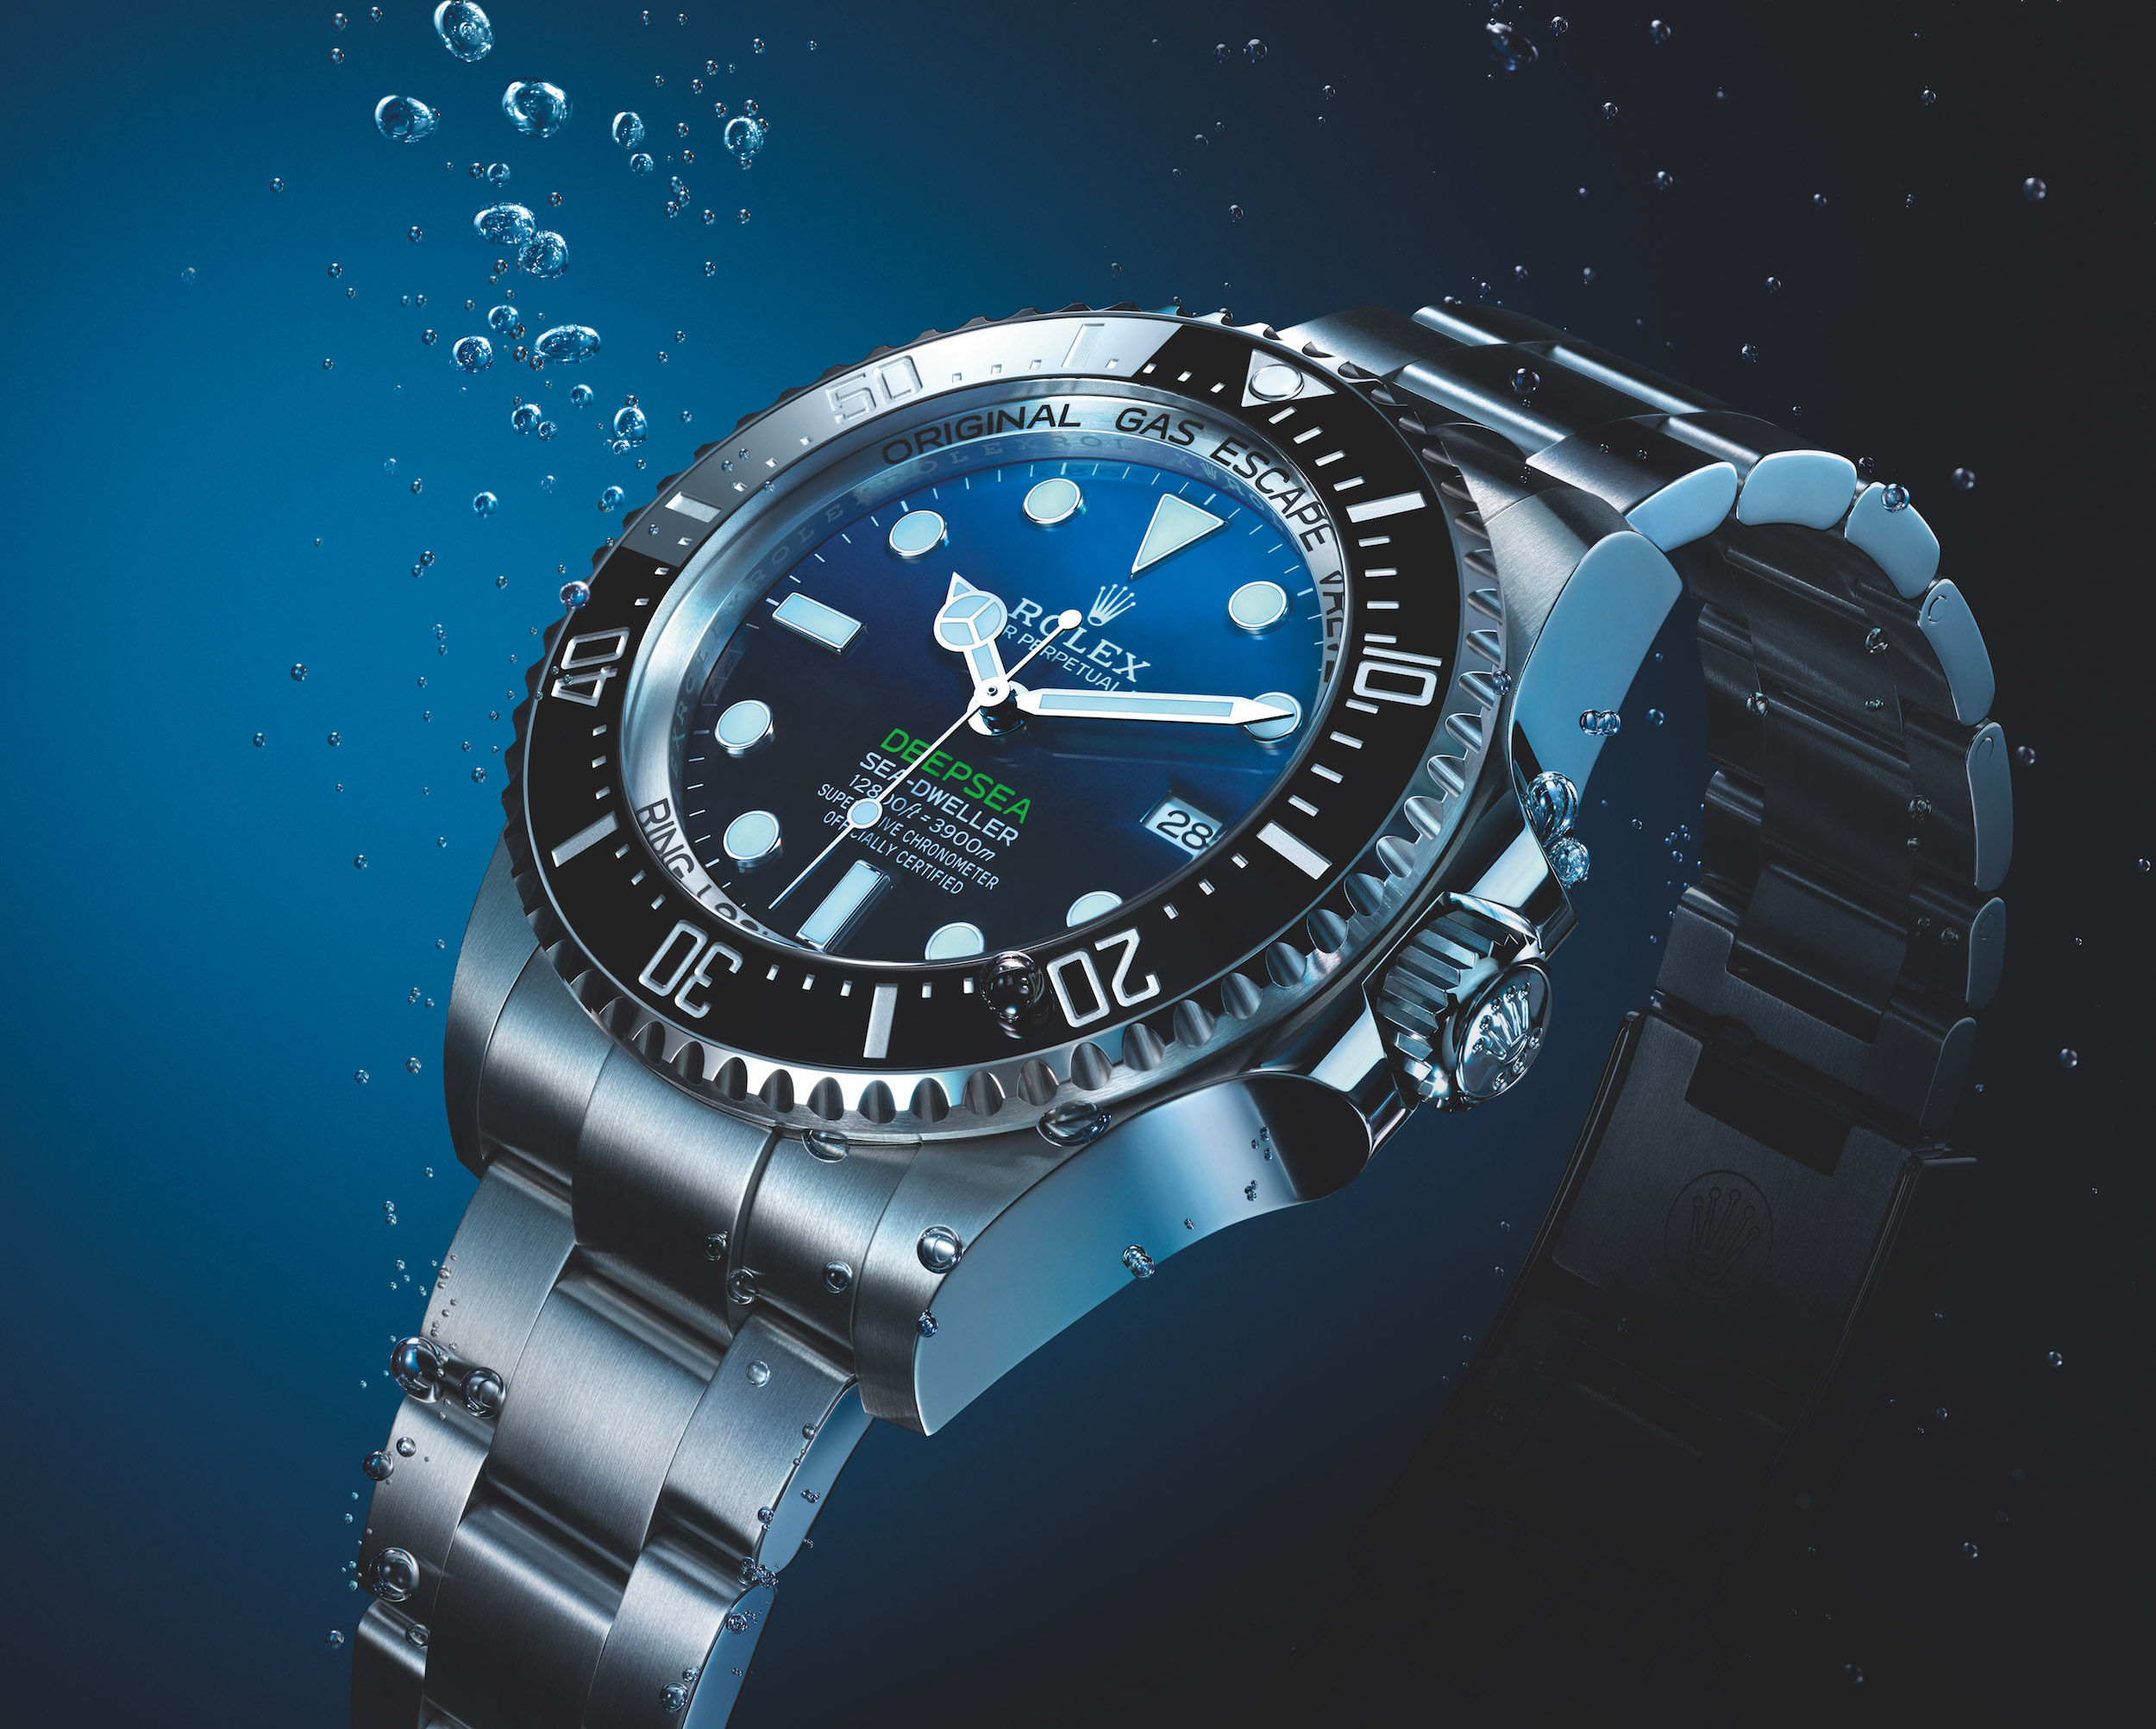 The new Oyster Perpetual Rolex Deepsea dive watch is king of the depths